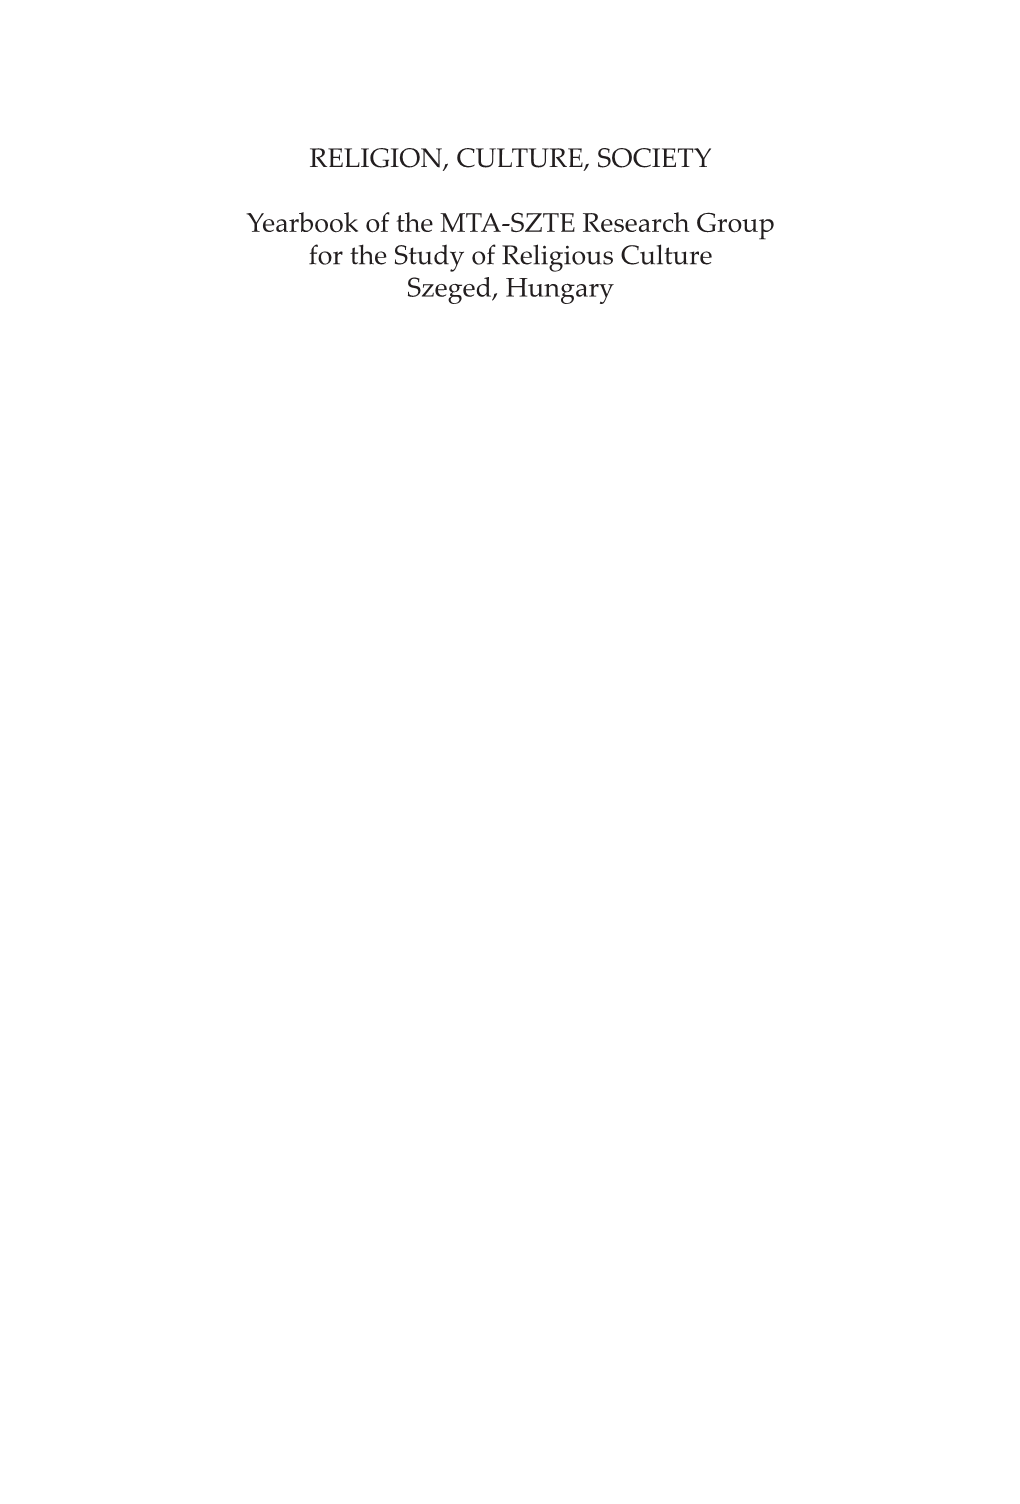 RELIGION, CULTURE, SOCIETY Yearbook of the MTA-SZTE